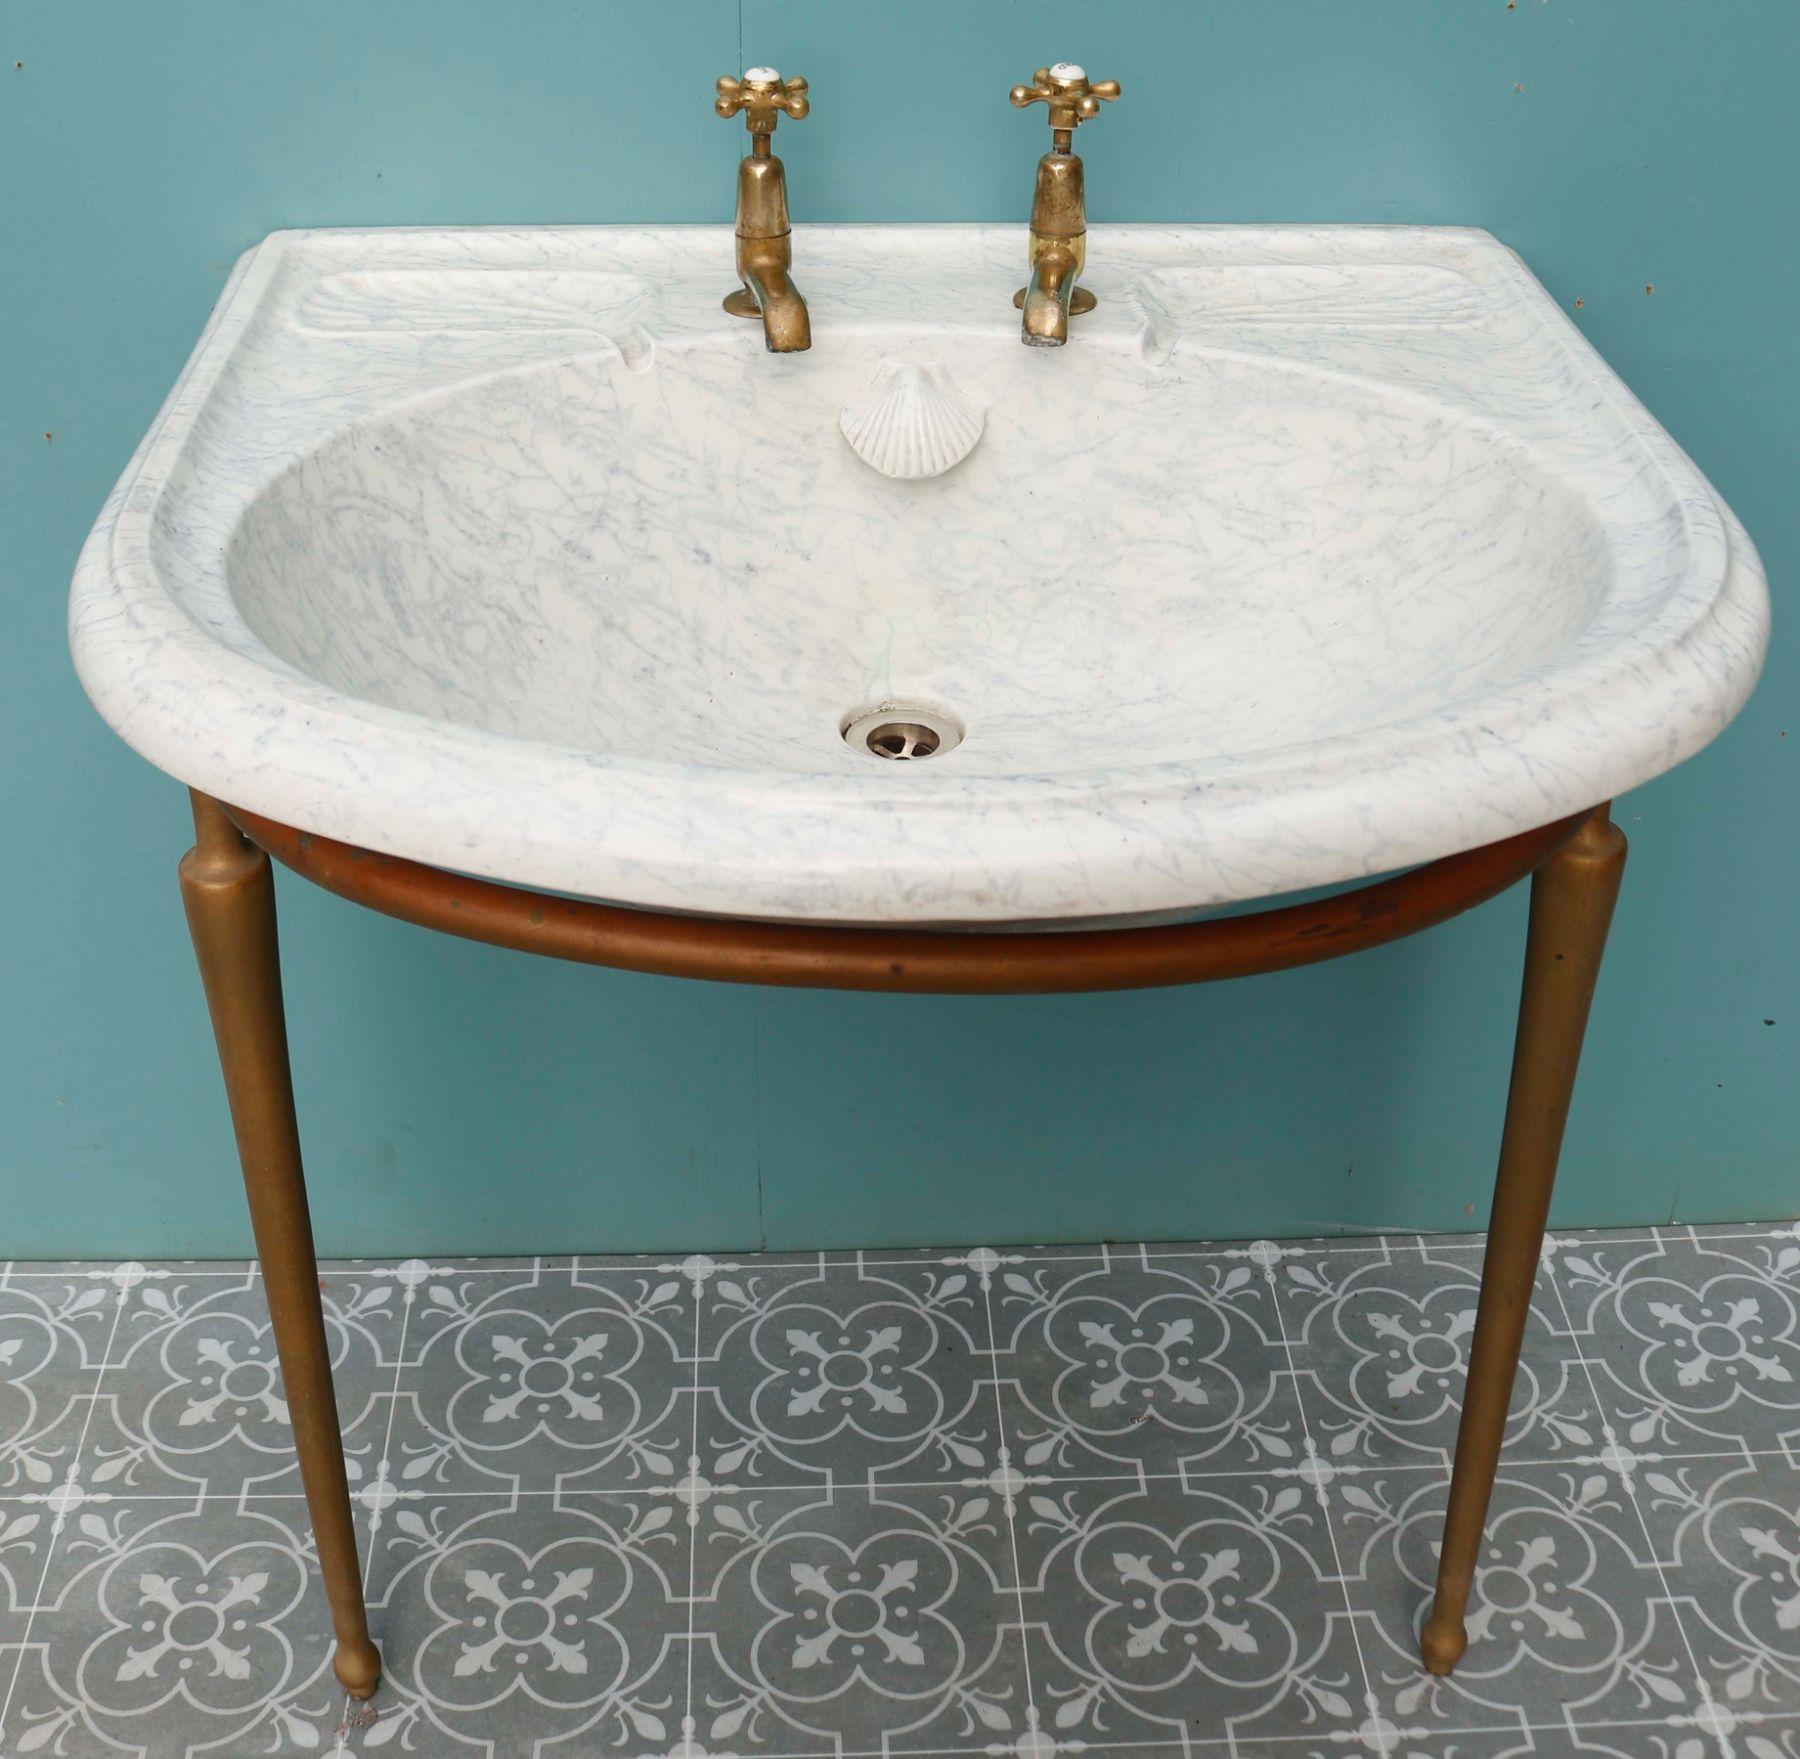 Porcelain Antique Rounded Marble Effect Sink